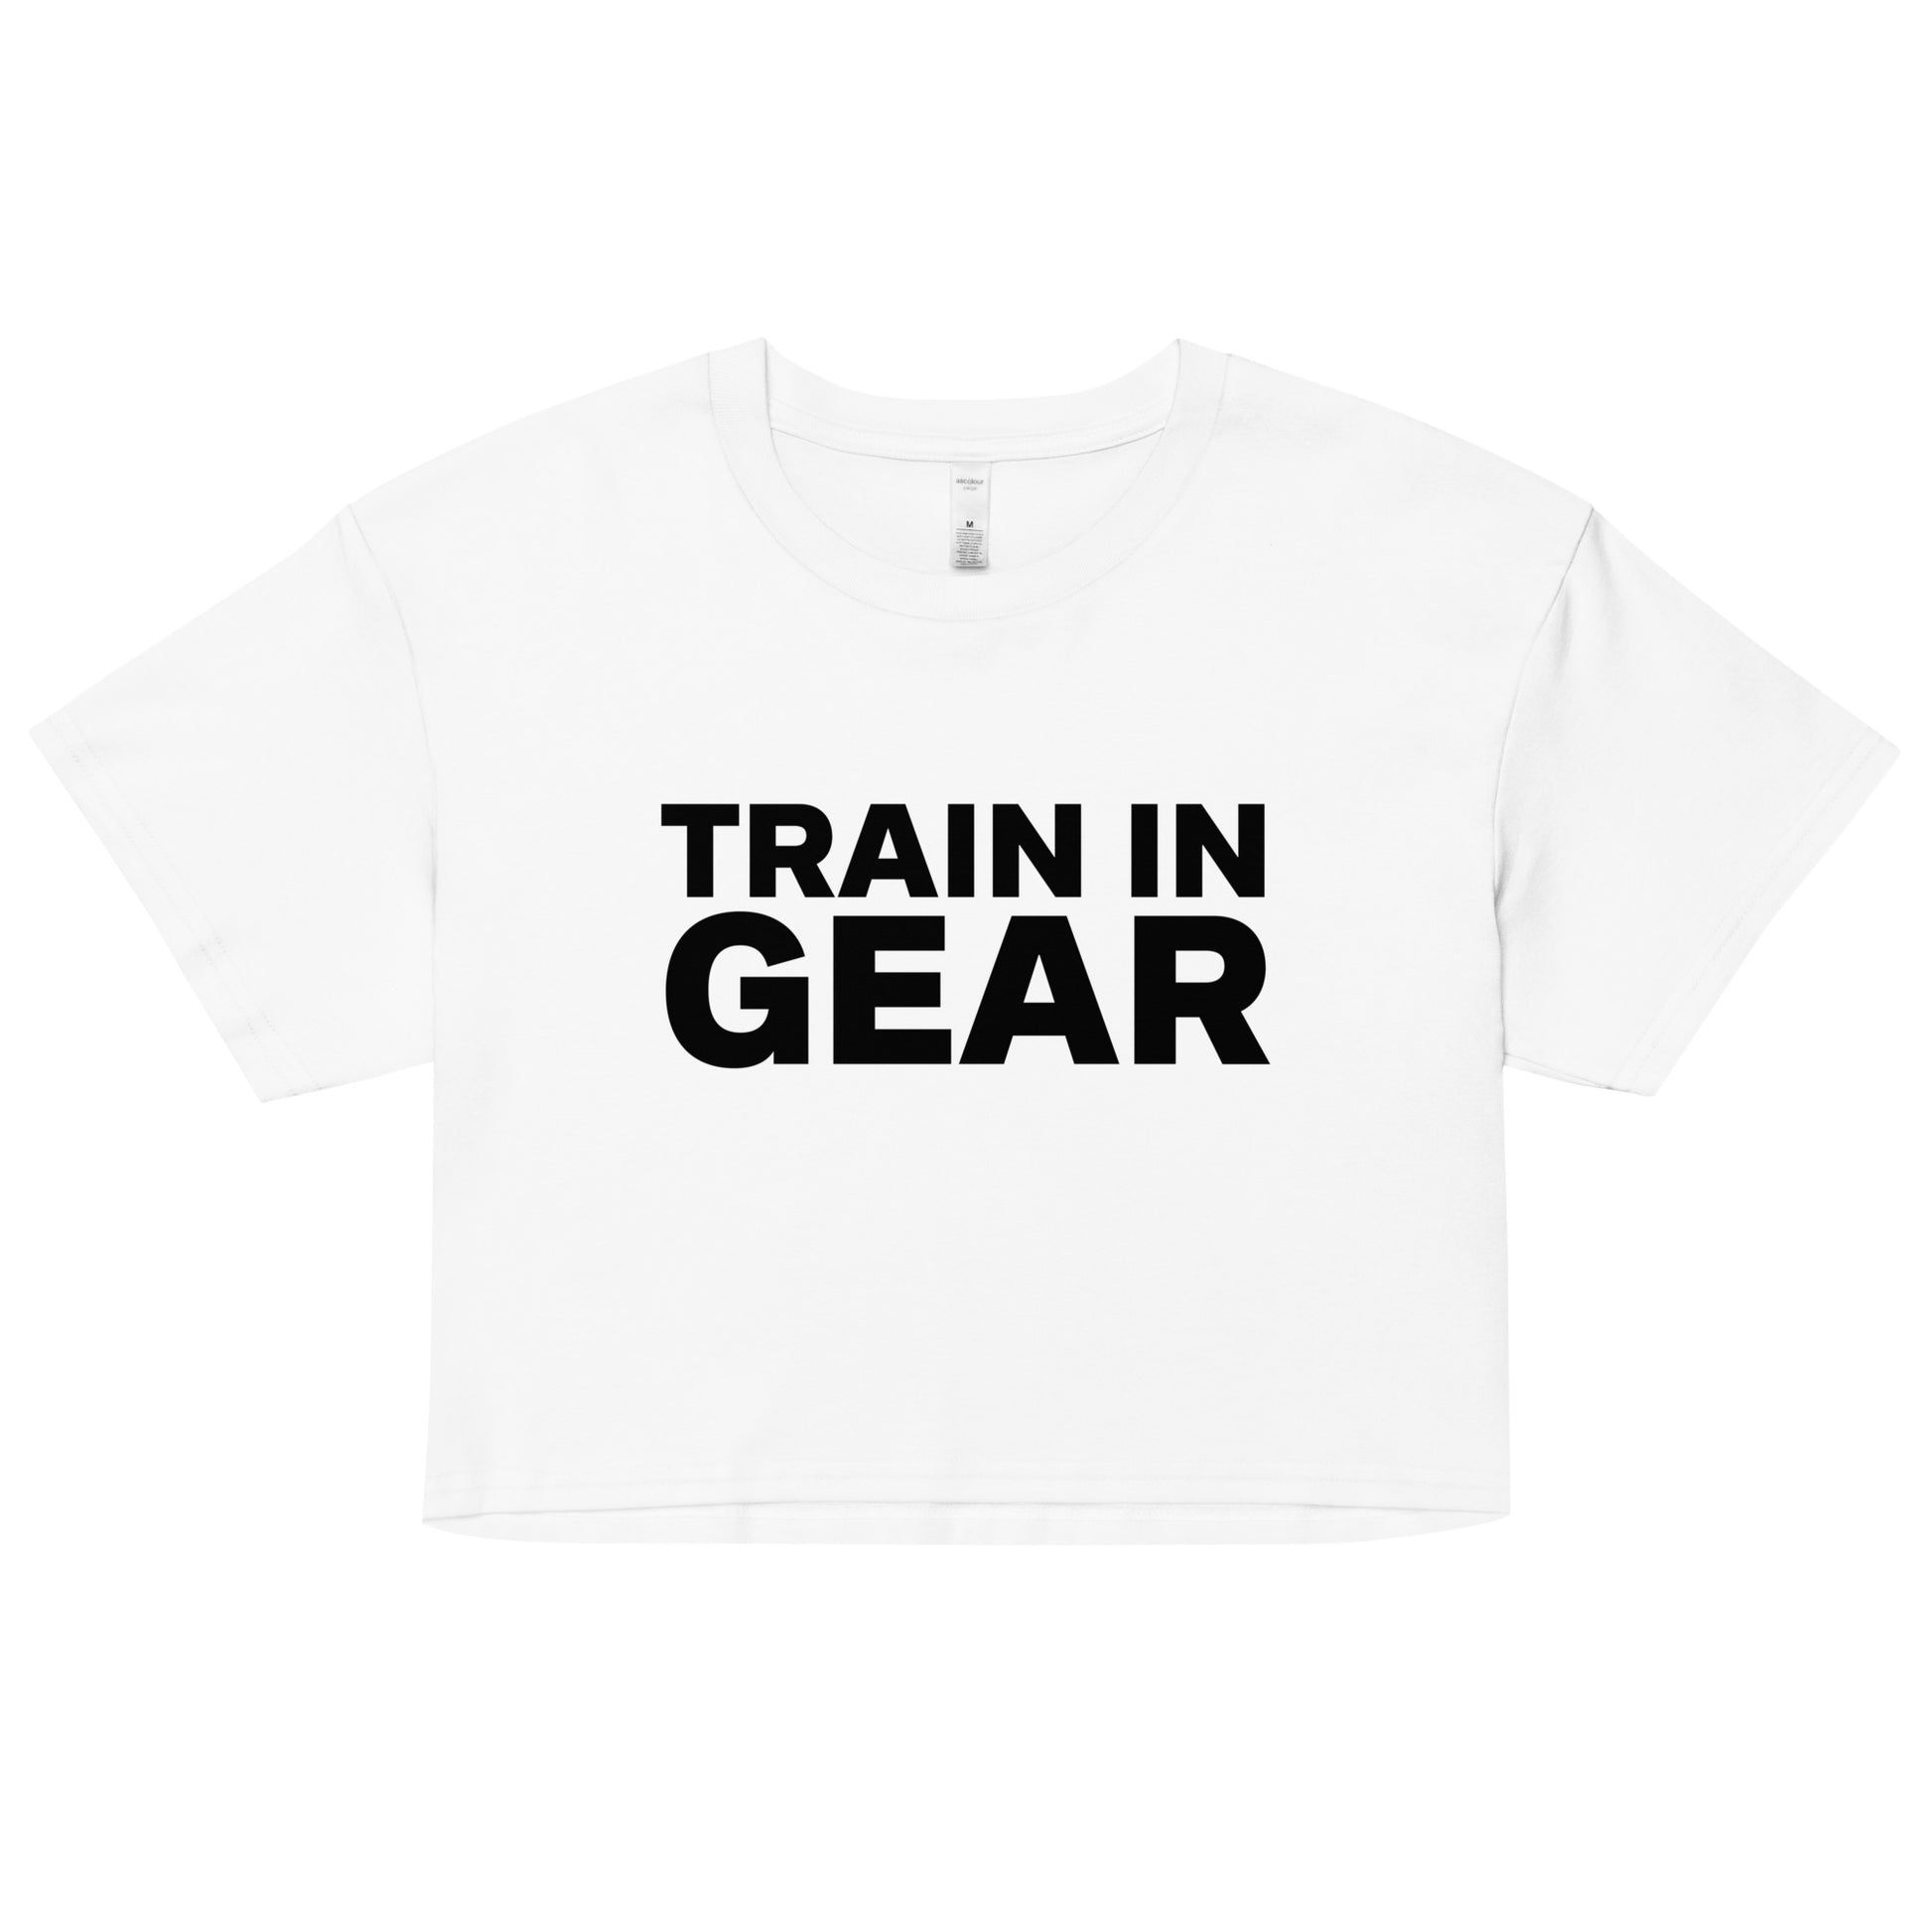 Train in Gear Women's firefighter and military crop top. White and black.